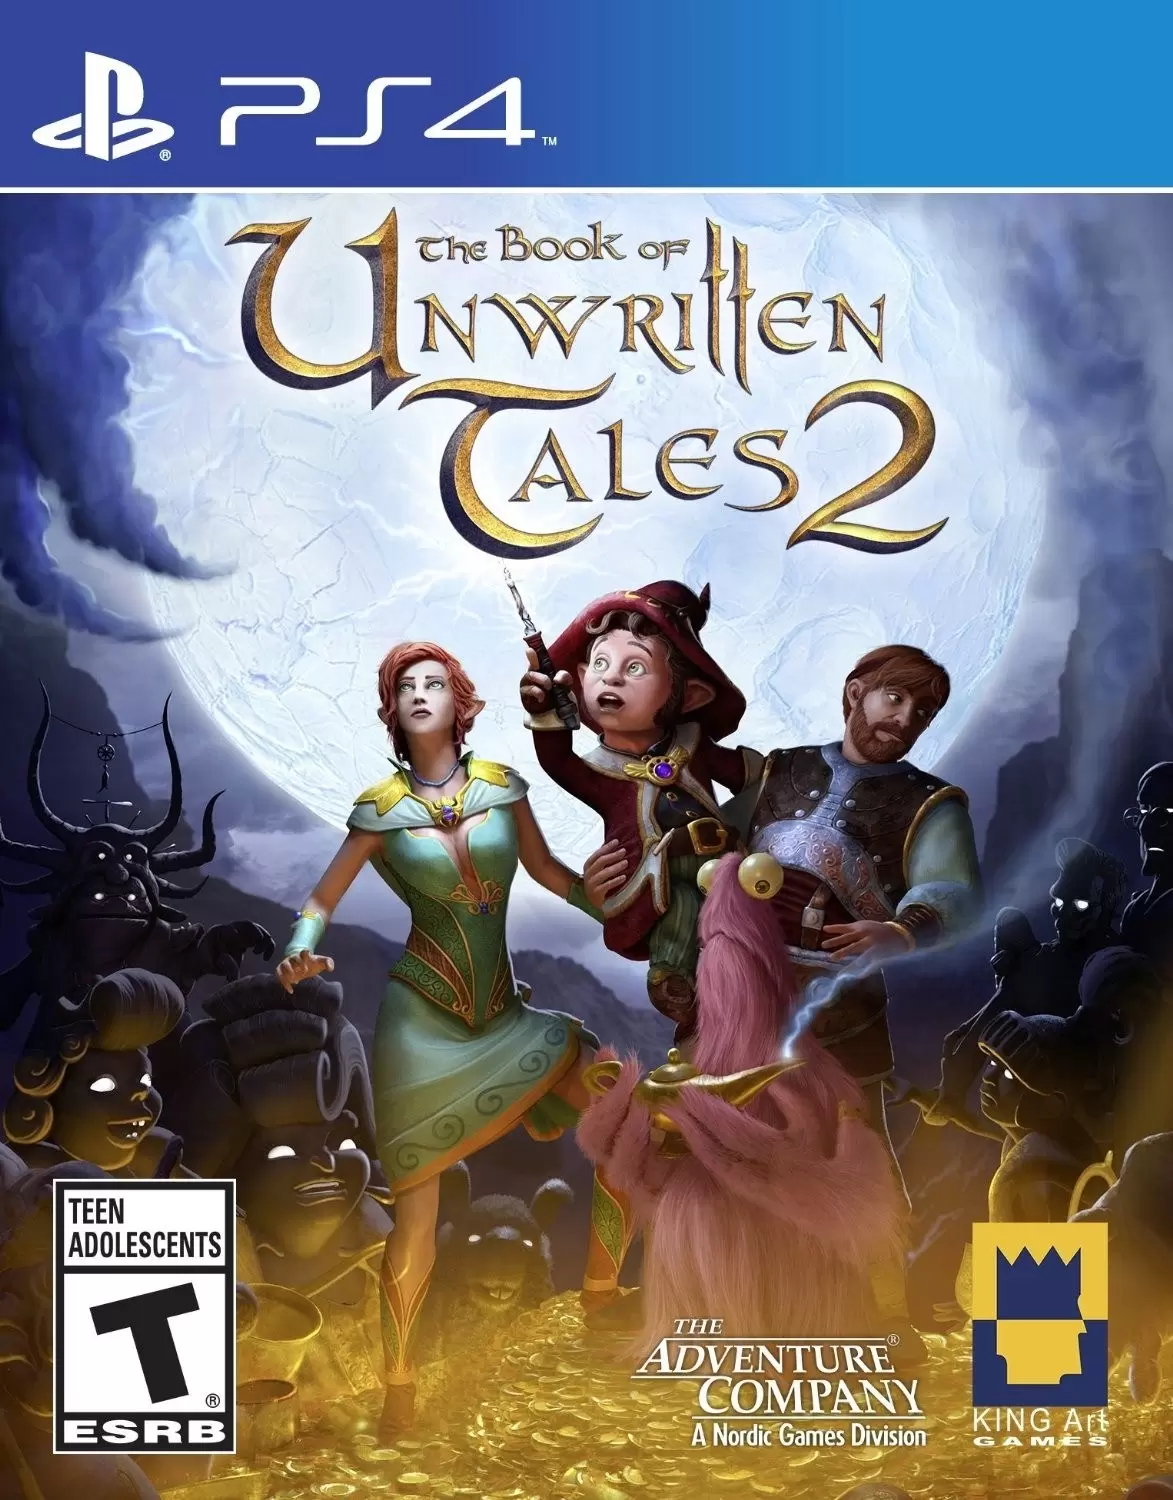 PS4 Games - The Book of Unwritten Tales 2